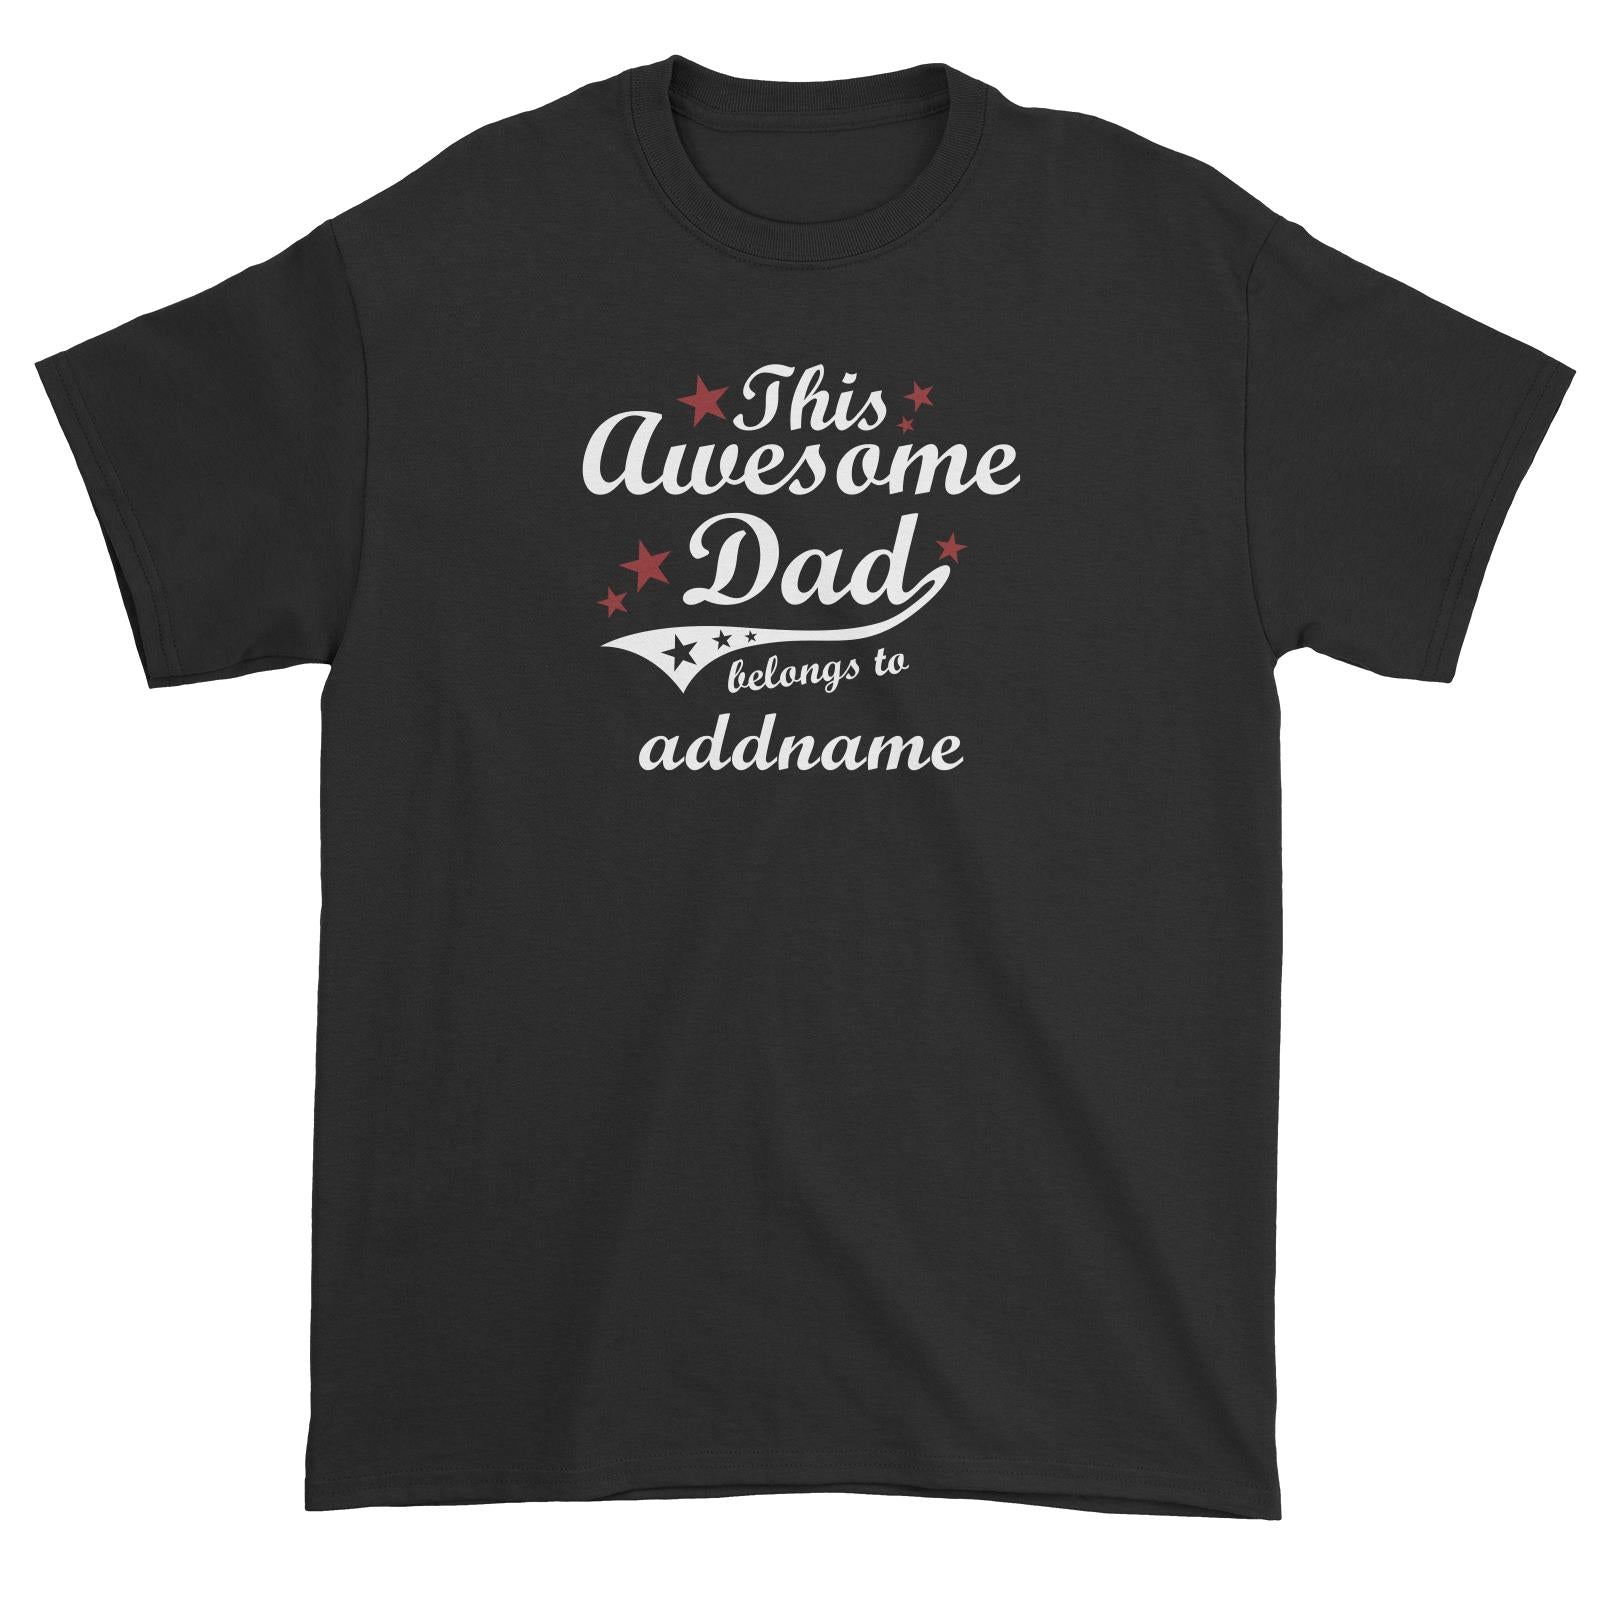 This Awesome Dad Belongs to Addname Unisex T-Shirt